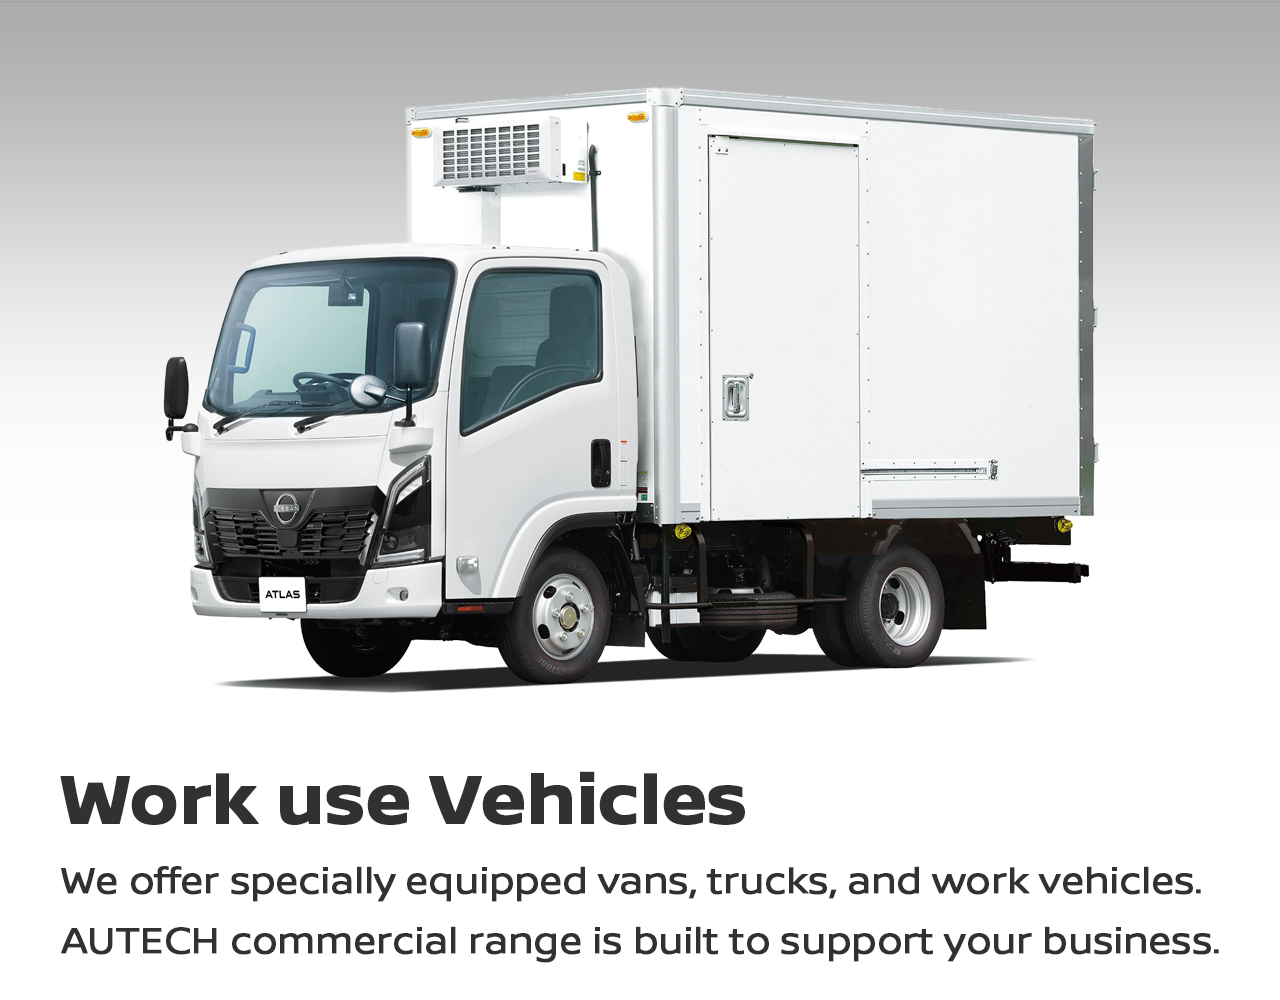 Work use Vehicles - We offer specially equipped vans, trucks, and work vehicles. Autech commercial range is built to support your business.